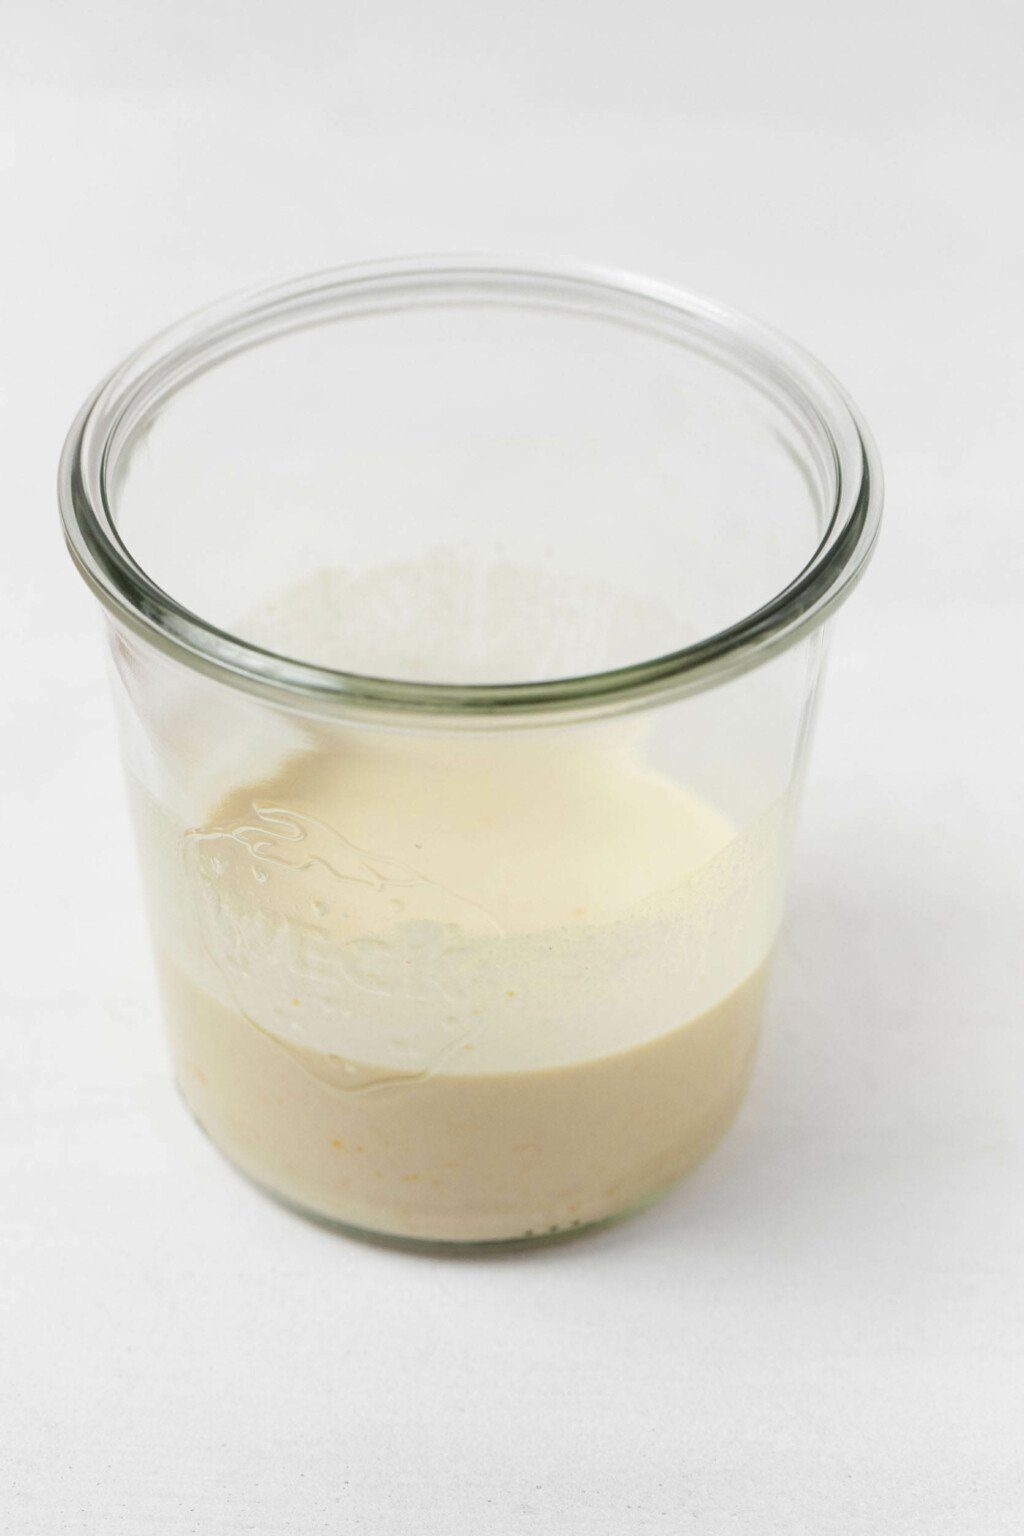 An overhead image of a creamy, off-white orange tahini dressing, which has been poured into a glass mason jar.